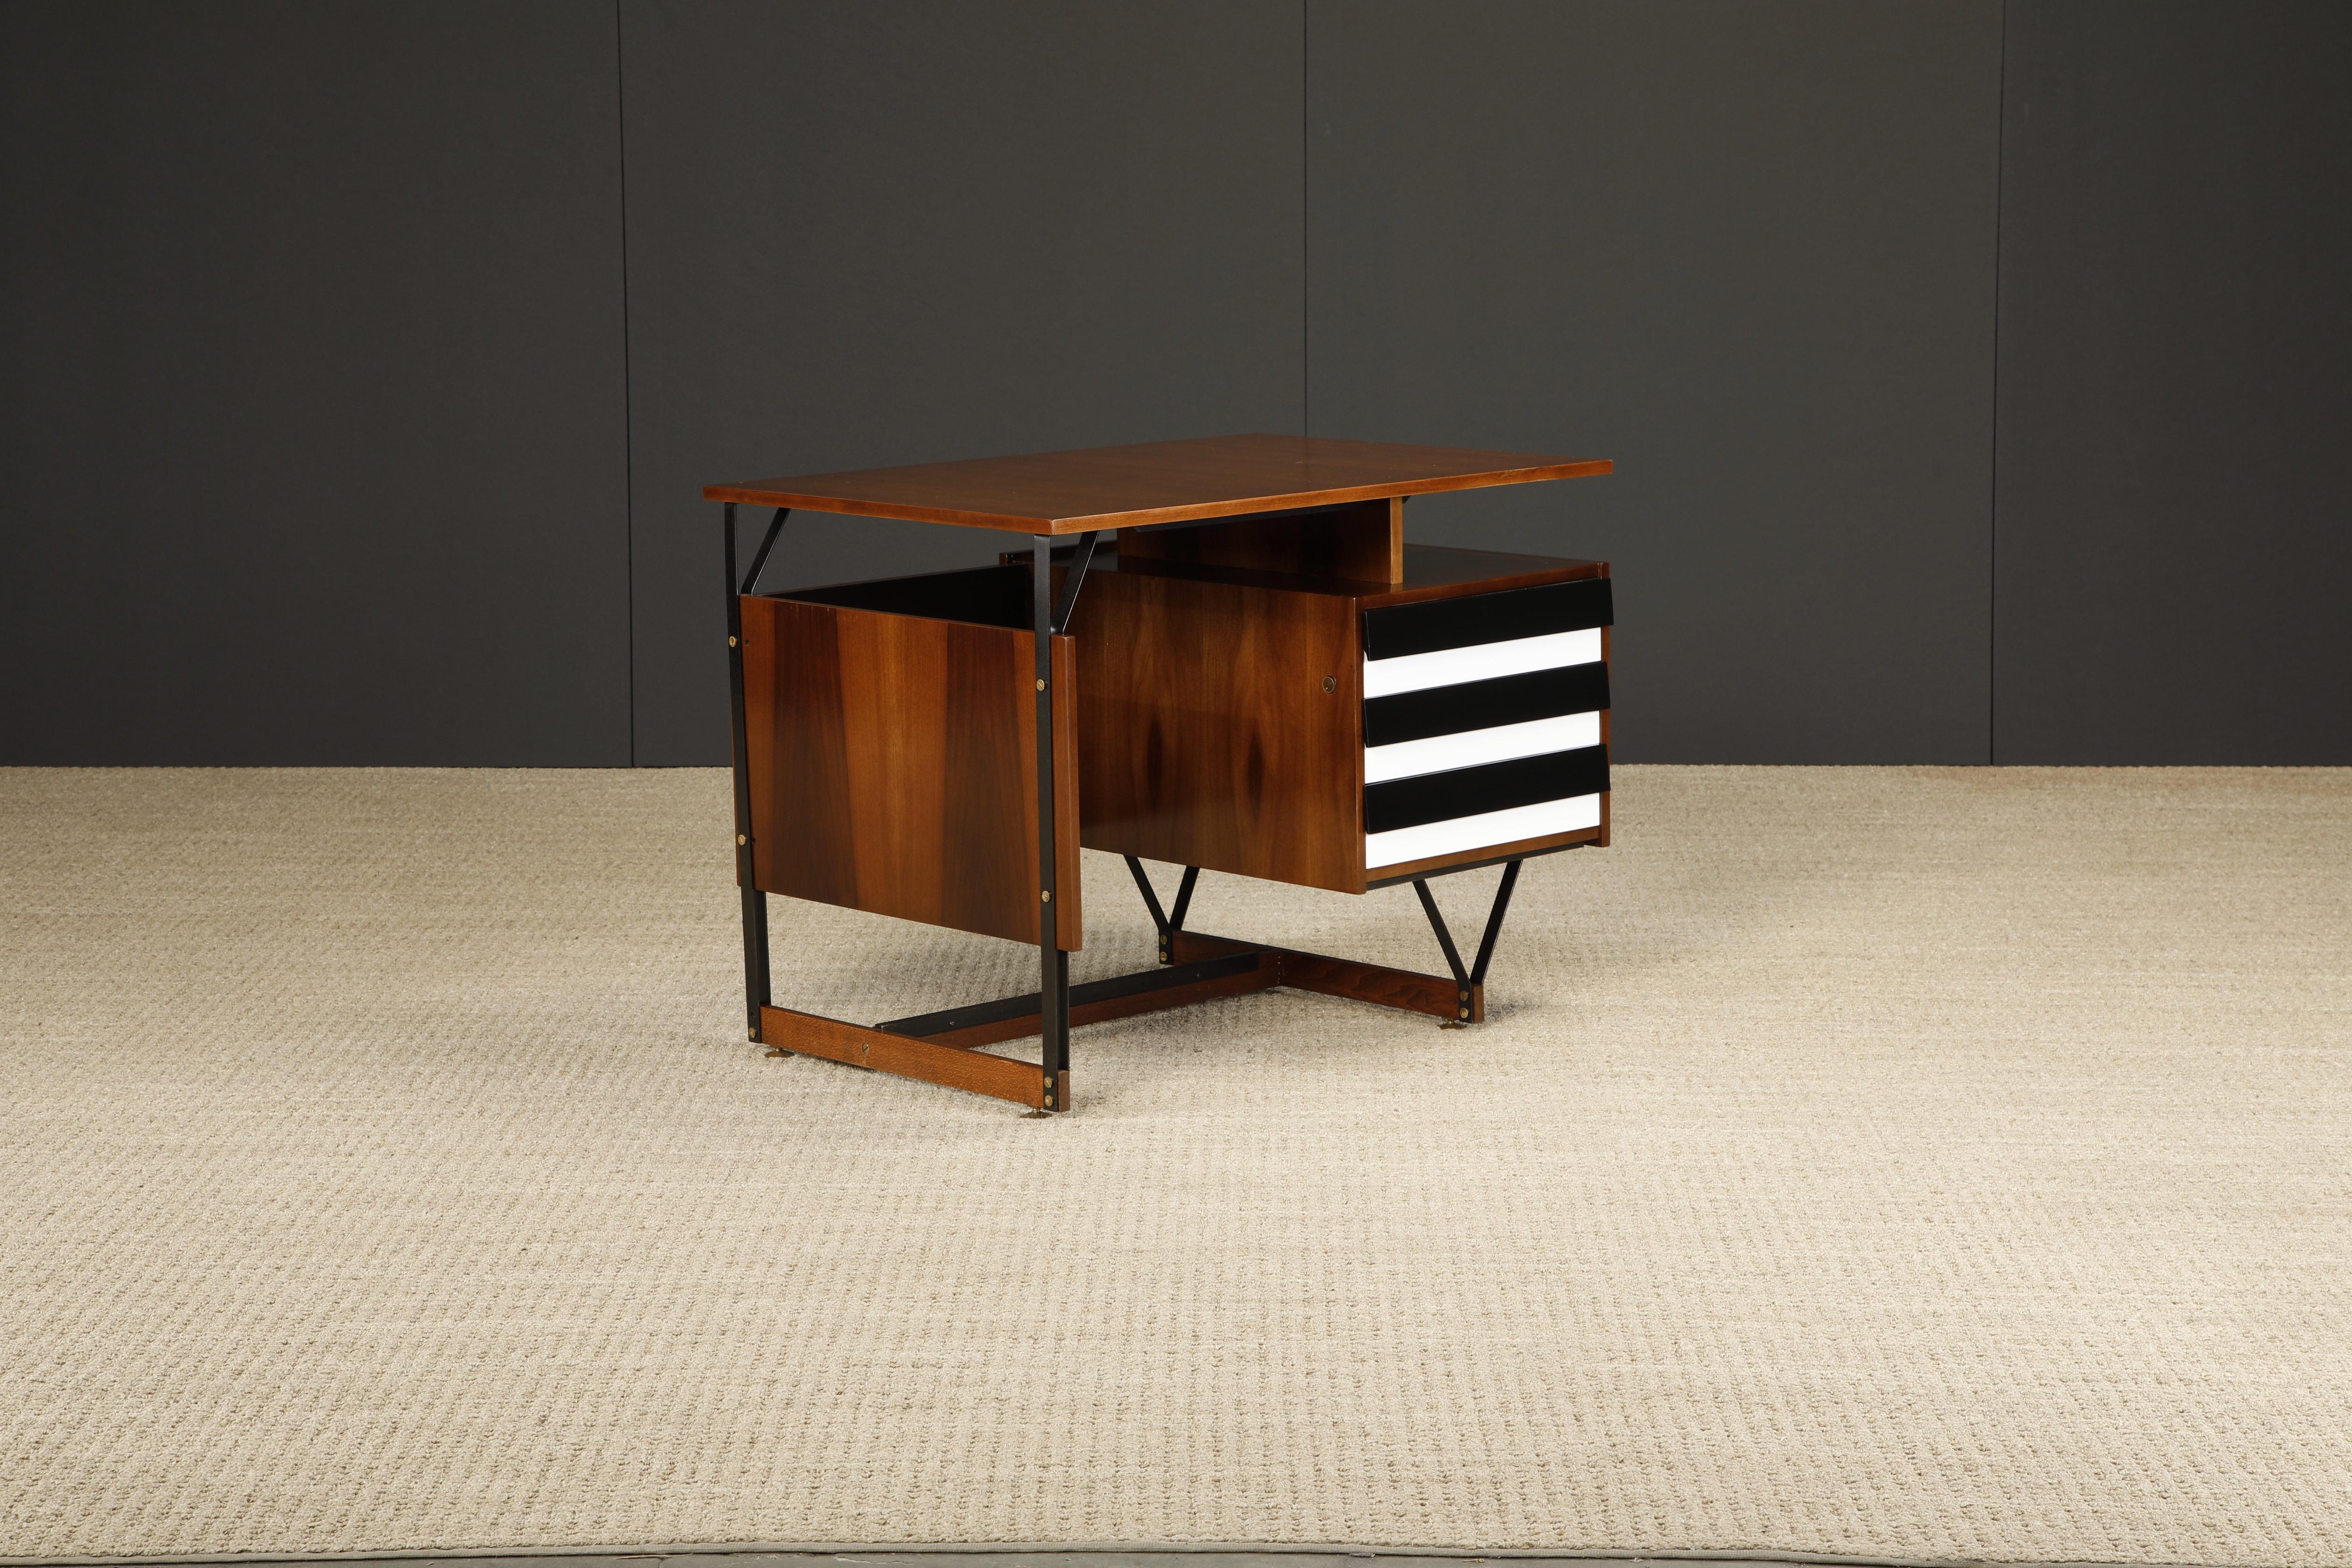 Beautifully refinished Mid-Century Modern desk produced in Italy circa 1950s. Featuring black steel and wood frame with large brass elements and alternating black and white drawer fronts. 

This design has been previously attributed to Ico Parisi